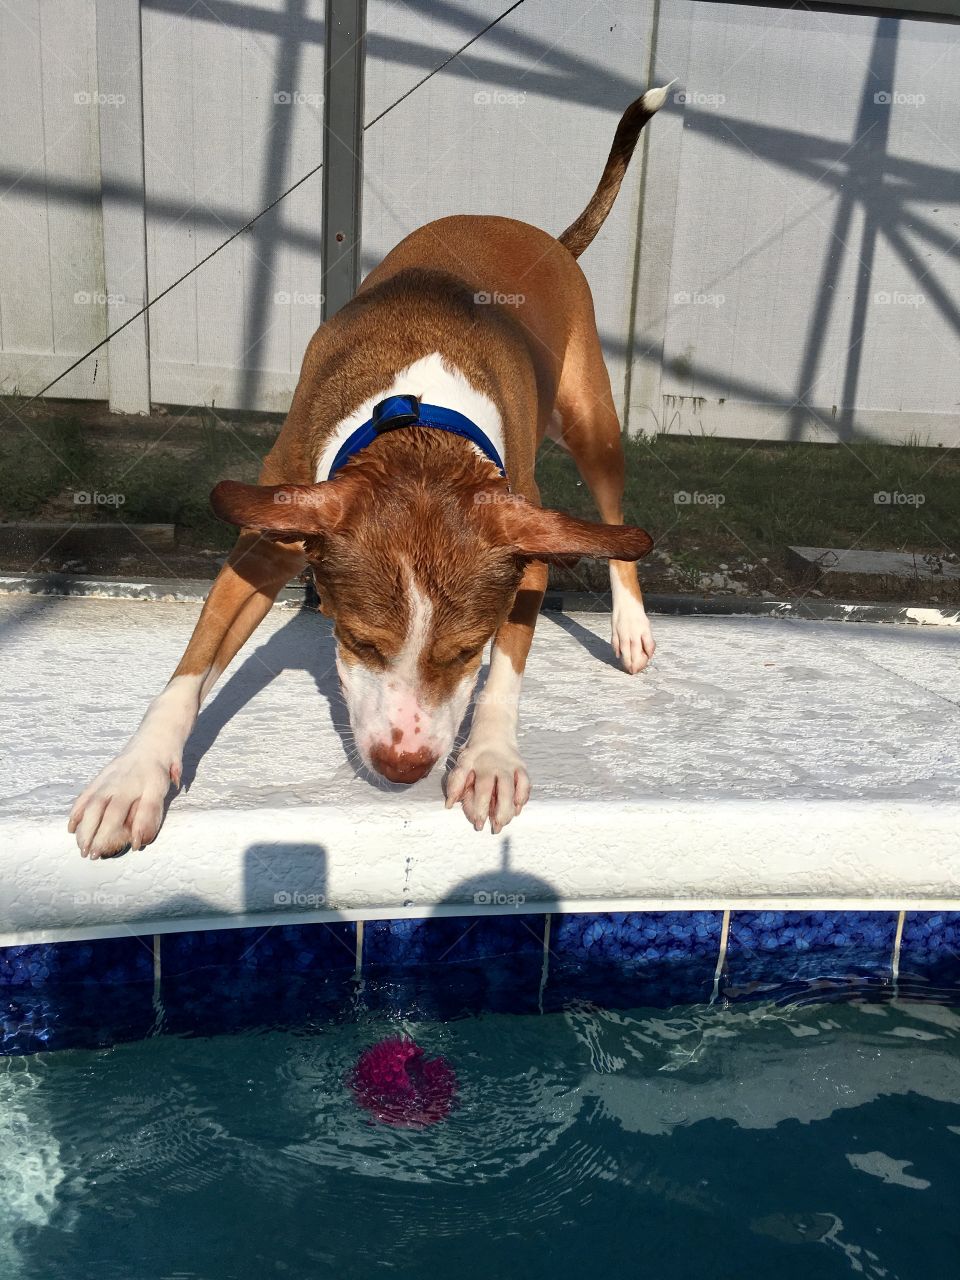 Adorable rescue pitbull dog trying to get a ball out of the pool